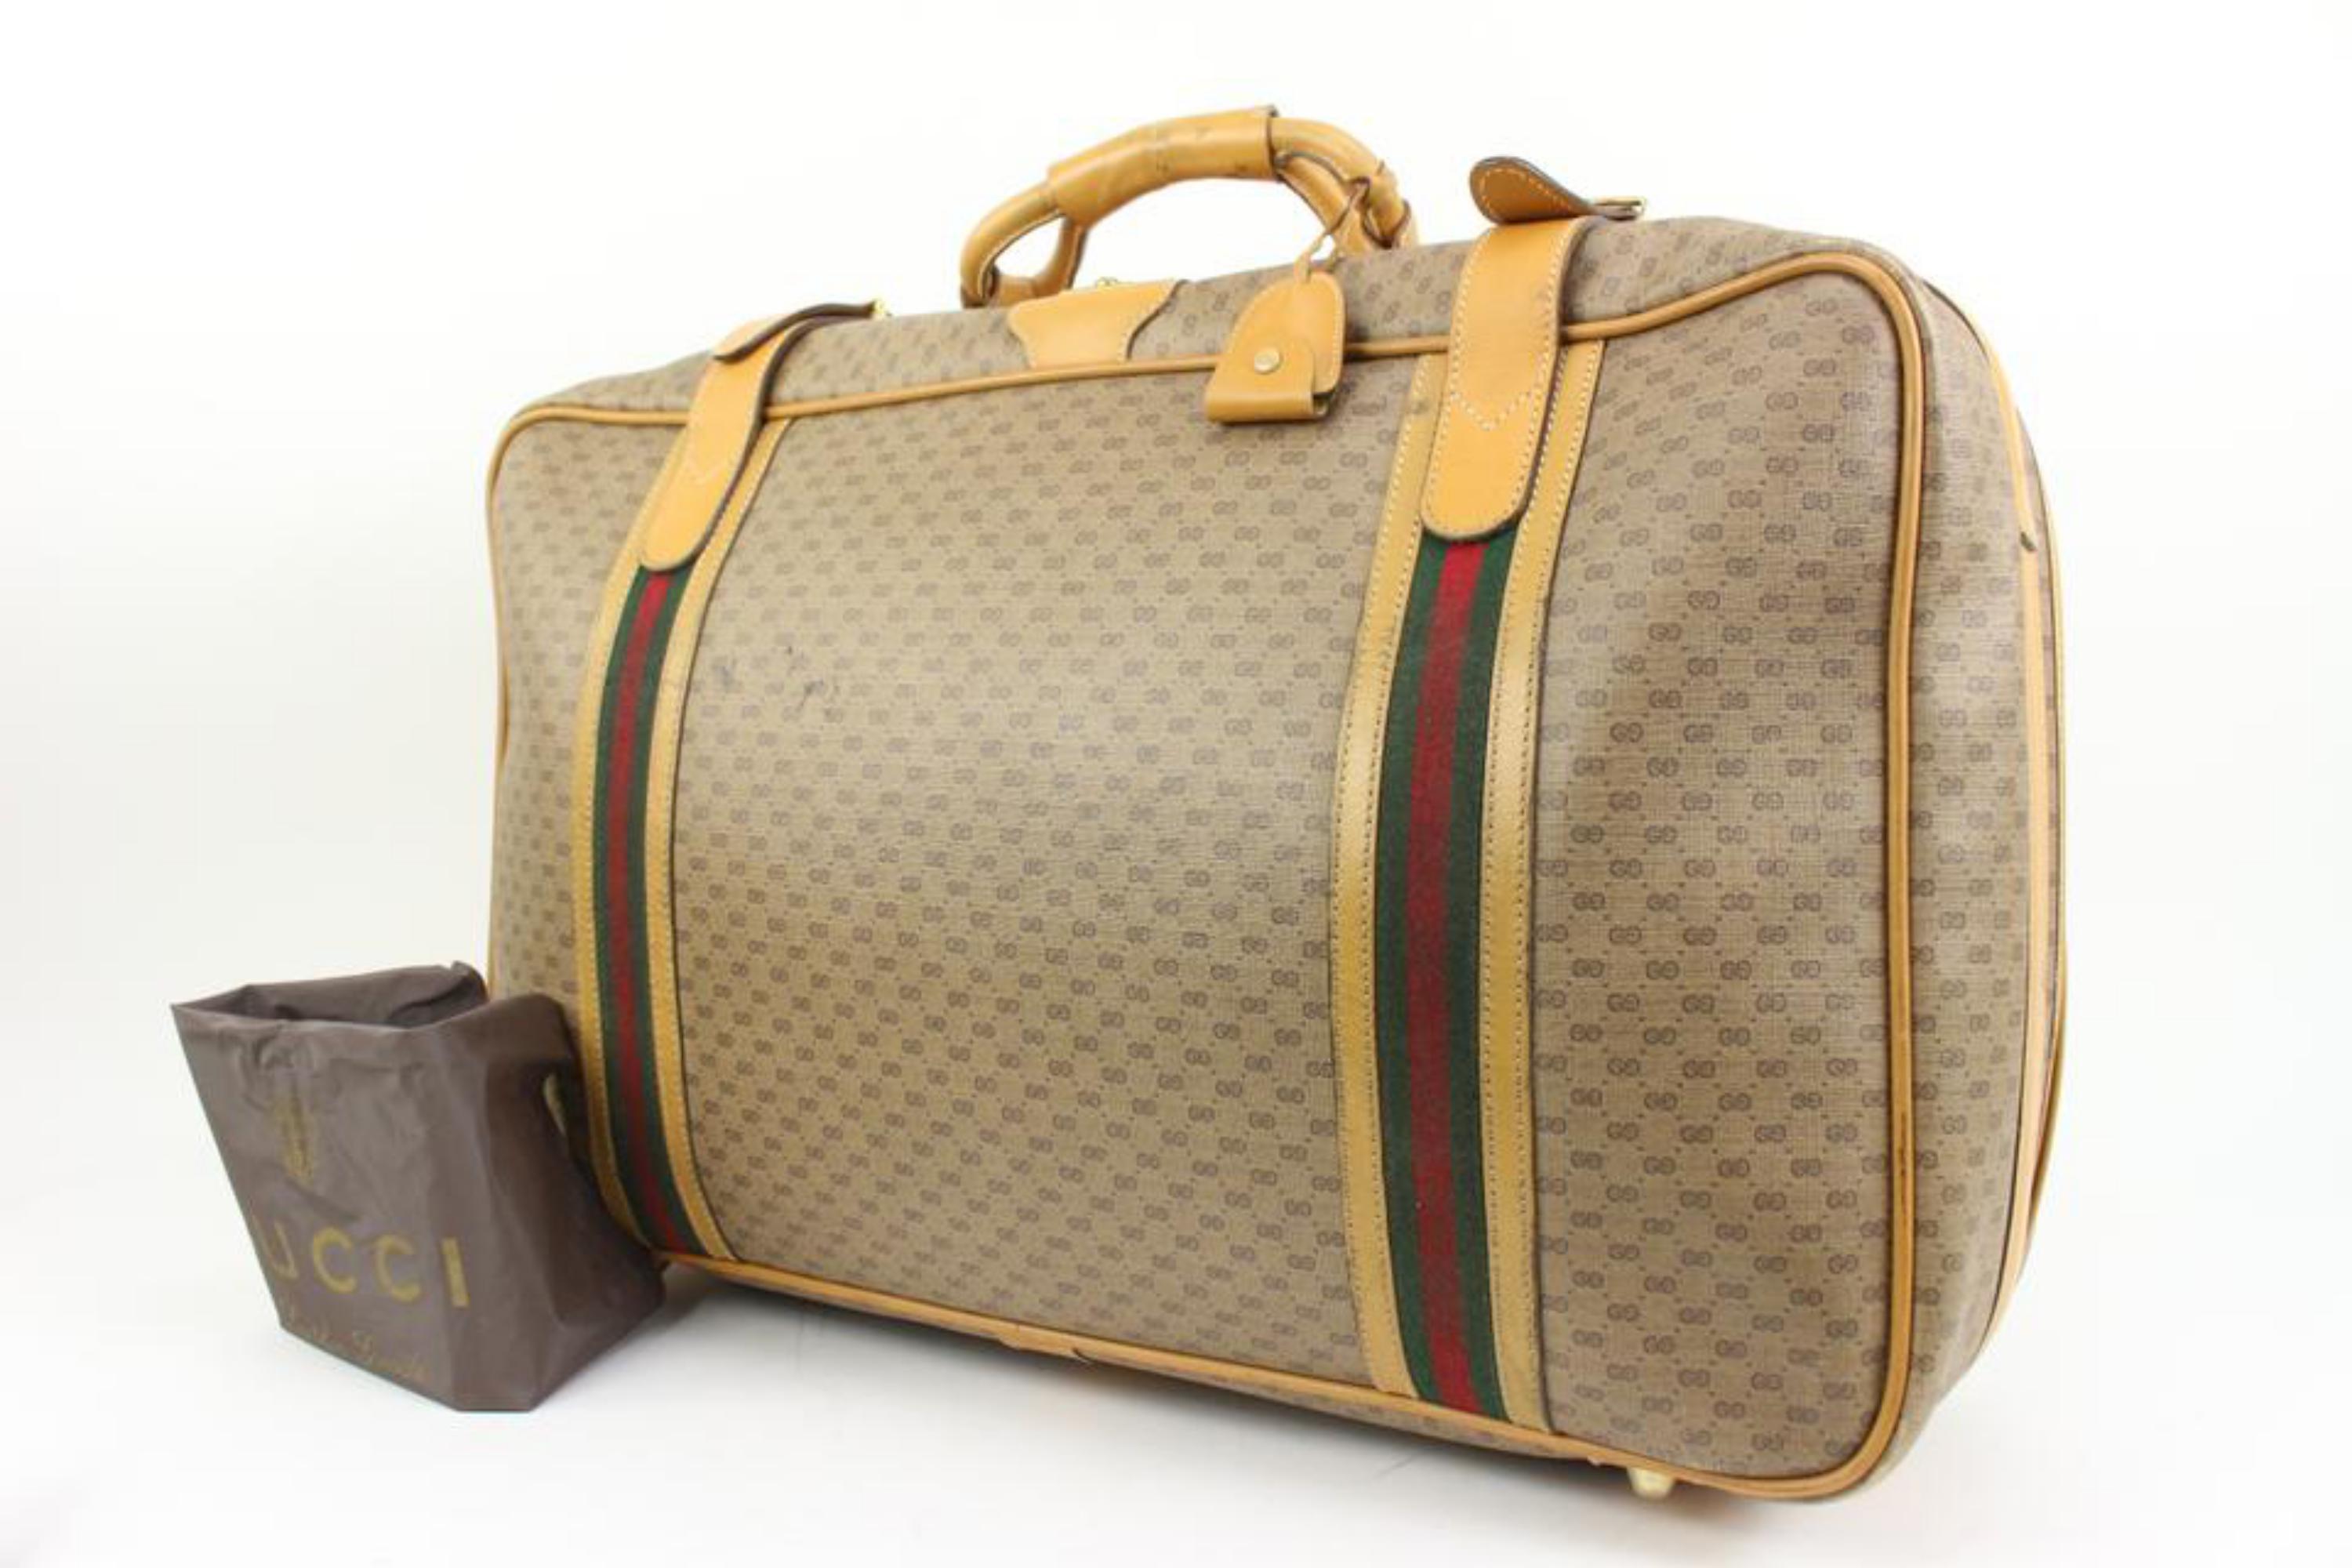 Gucci XL Micro GG Web Suitcase Soft Trunk Luggage 22g321s
Date Code/Serial Number: 
Made In: Italy
Measurements: Length:  24